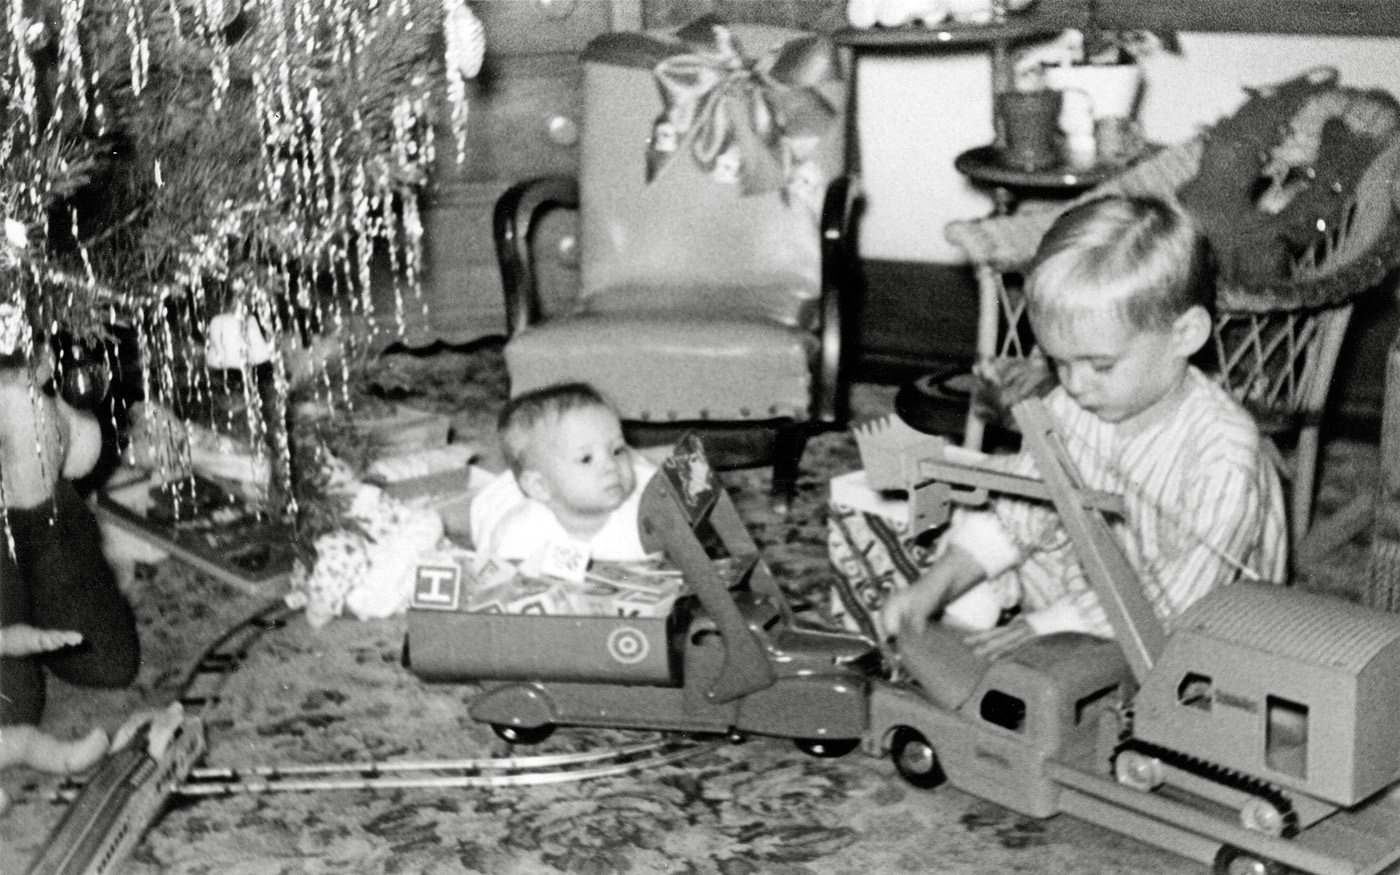 Christmas morn 1949, Hamtramck, Michigan. Amazing what details I remember. My sister is 10 months old. I am checking out the plastic motor under the hood of the truck. When I came into the living room, my parents were already up and had the windup train running around the figure eight track. I stepped on the track and derailed the train. The kid-sized rocking chair in the center was covered in yellow vinyl. It suffered a sudden end a few years later when a table lamp fell on it melting a hole in the plastic. I still remember my Mom's panic and and seeing the excelsior stuffing where the plastic melted away. The picture was taken with my Father's trusty Argus C-3 which used large flash bulbs which had the same screw in base as a standard light bulb. View full size.